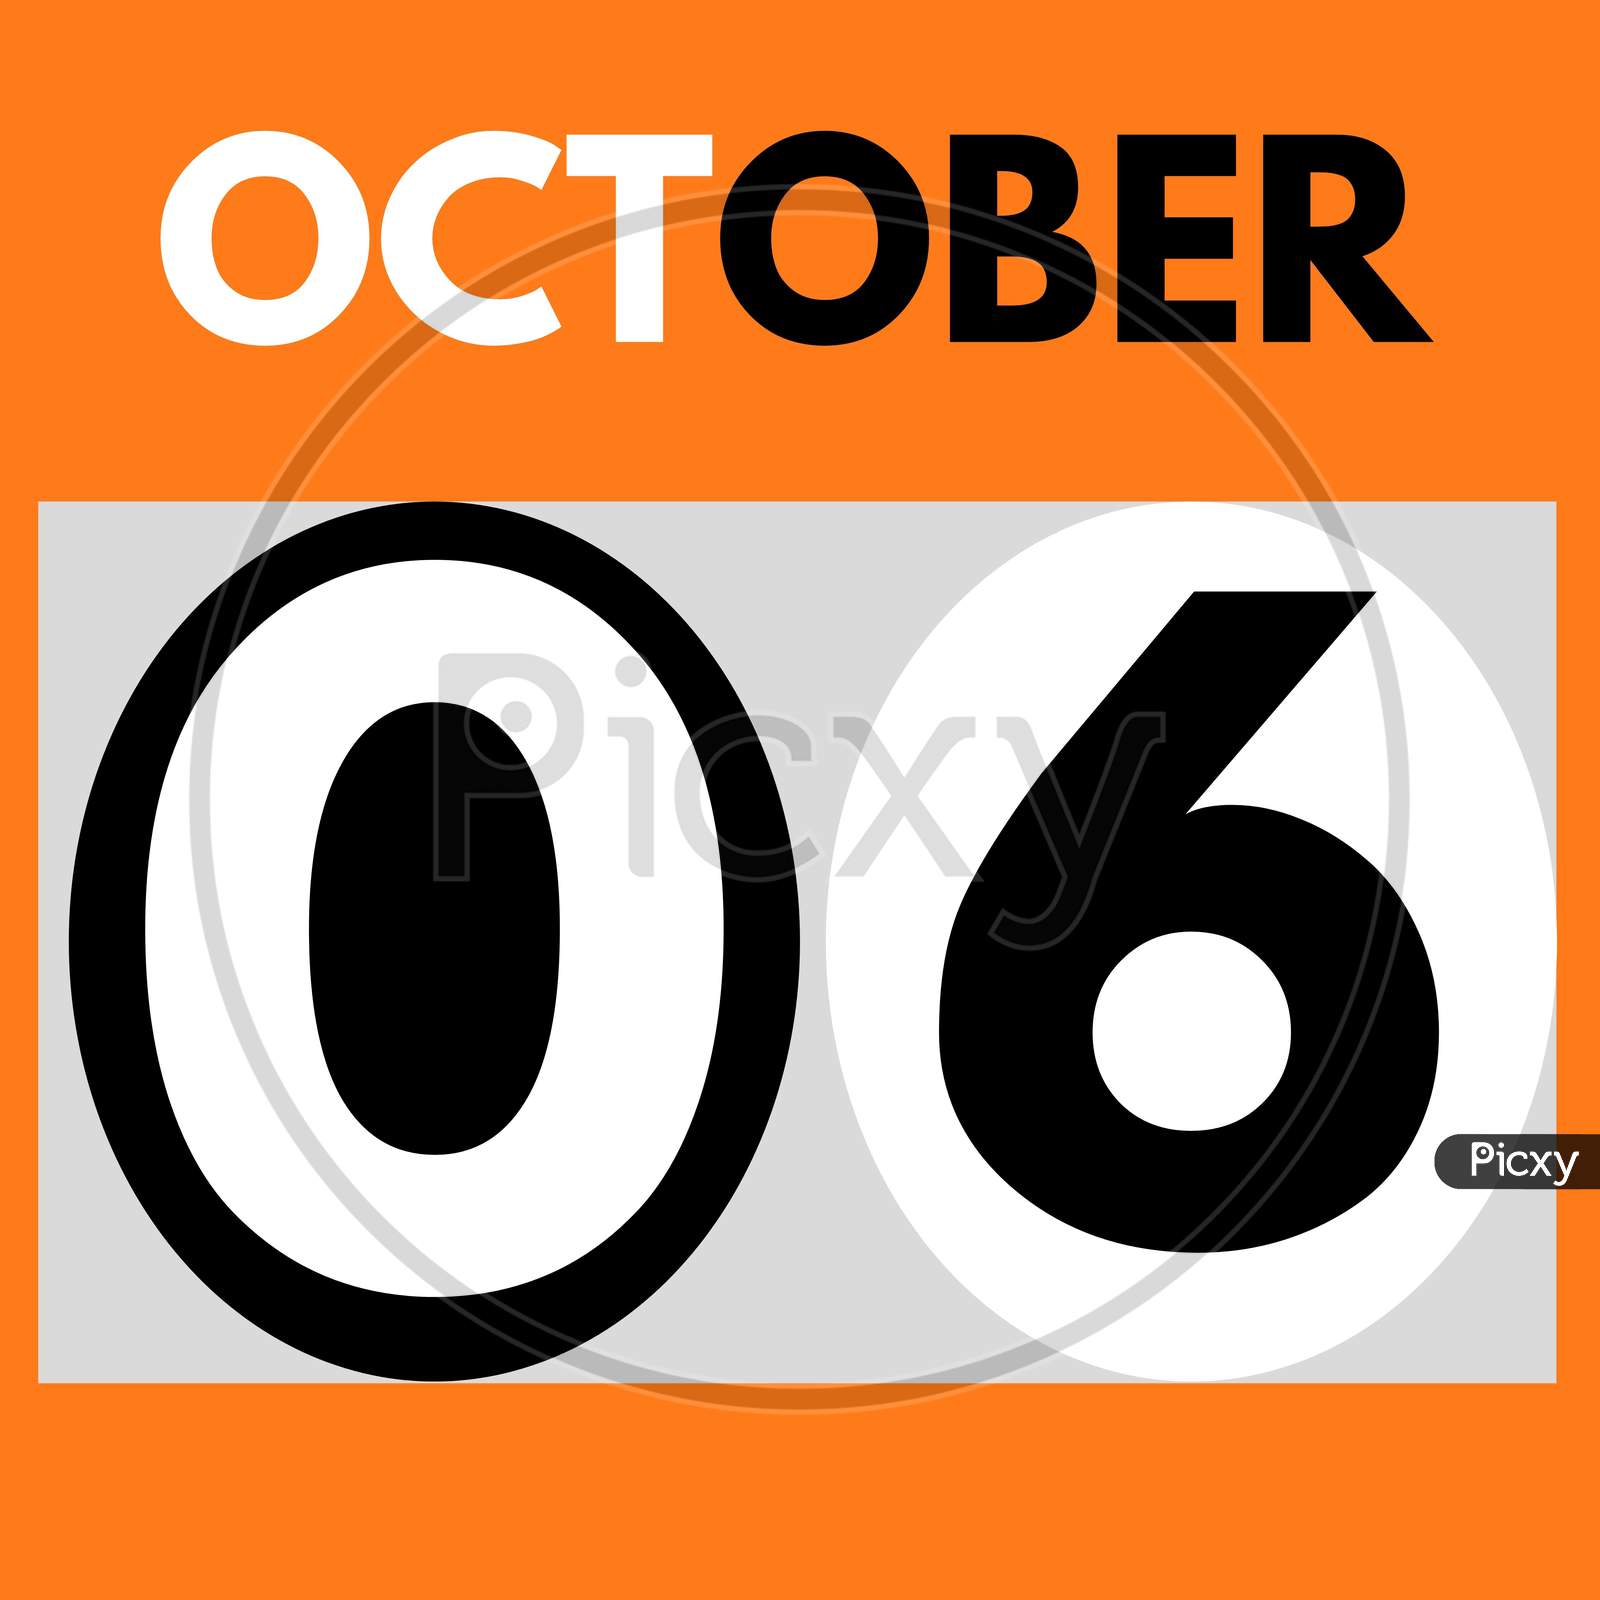 October 6 . Modern Daily Calendar Icon .Date ,Day, Month .Calendar For The Month Of October